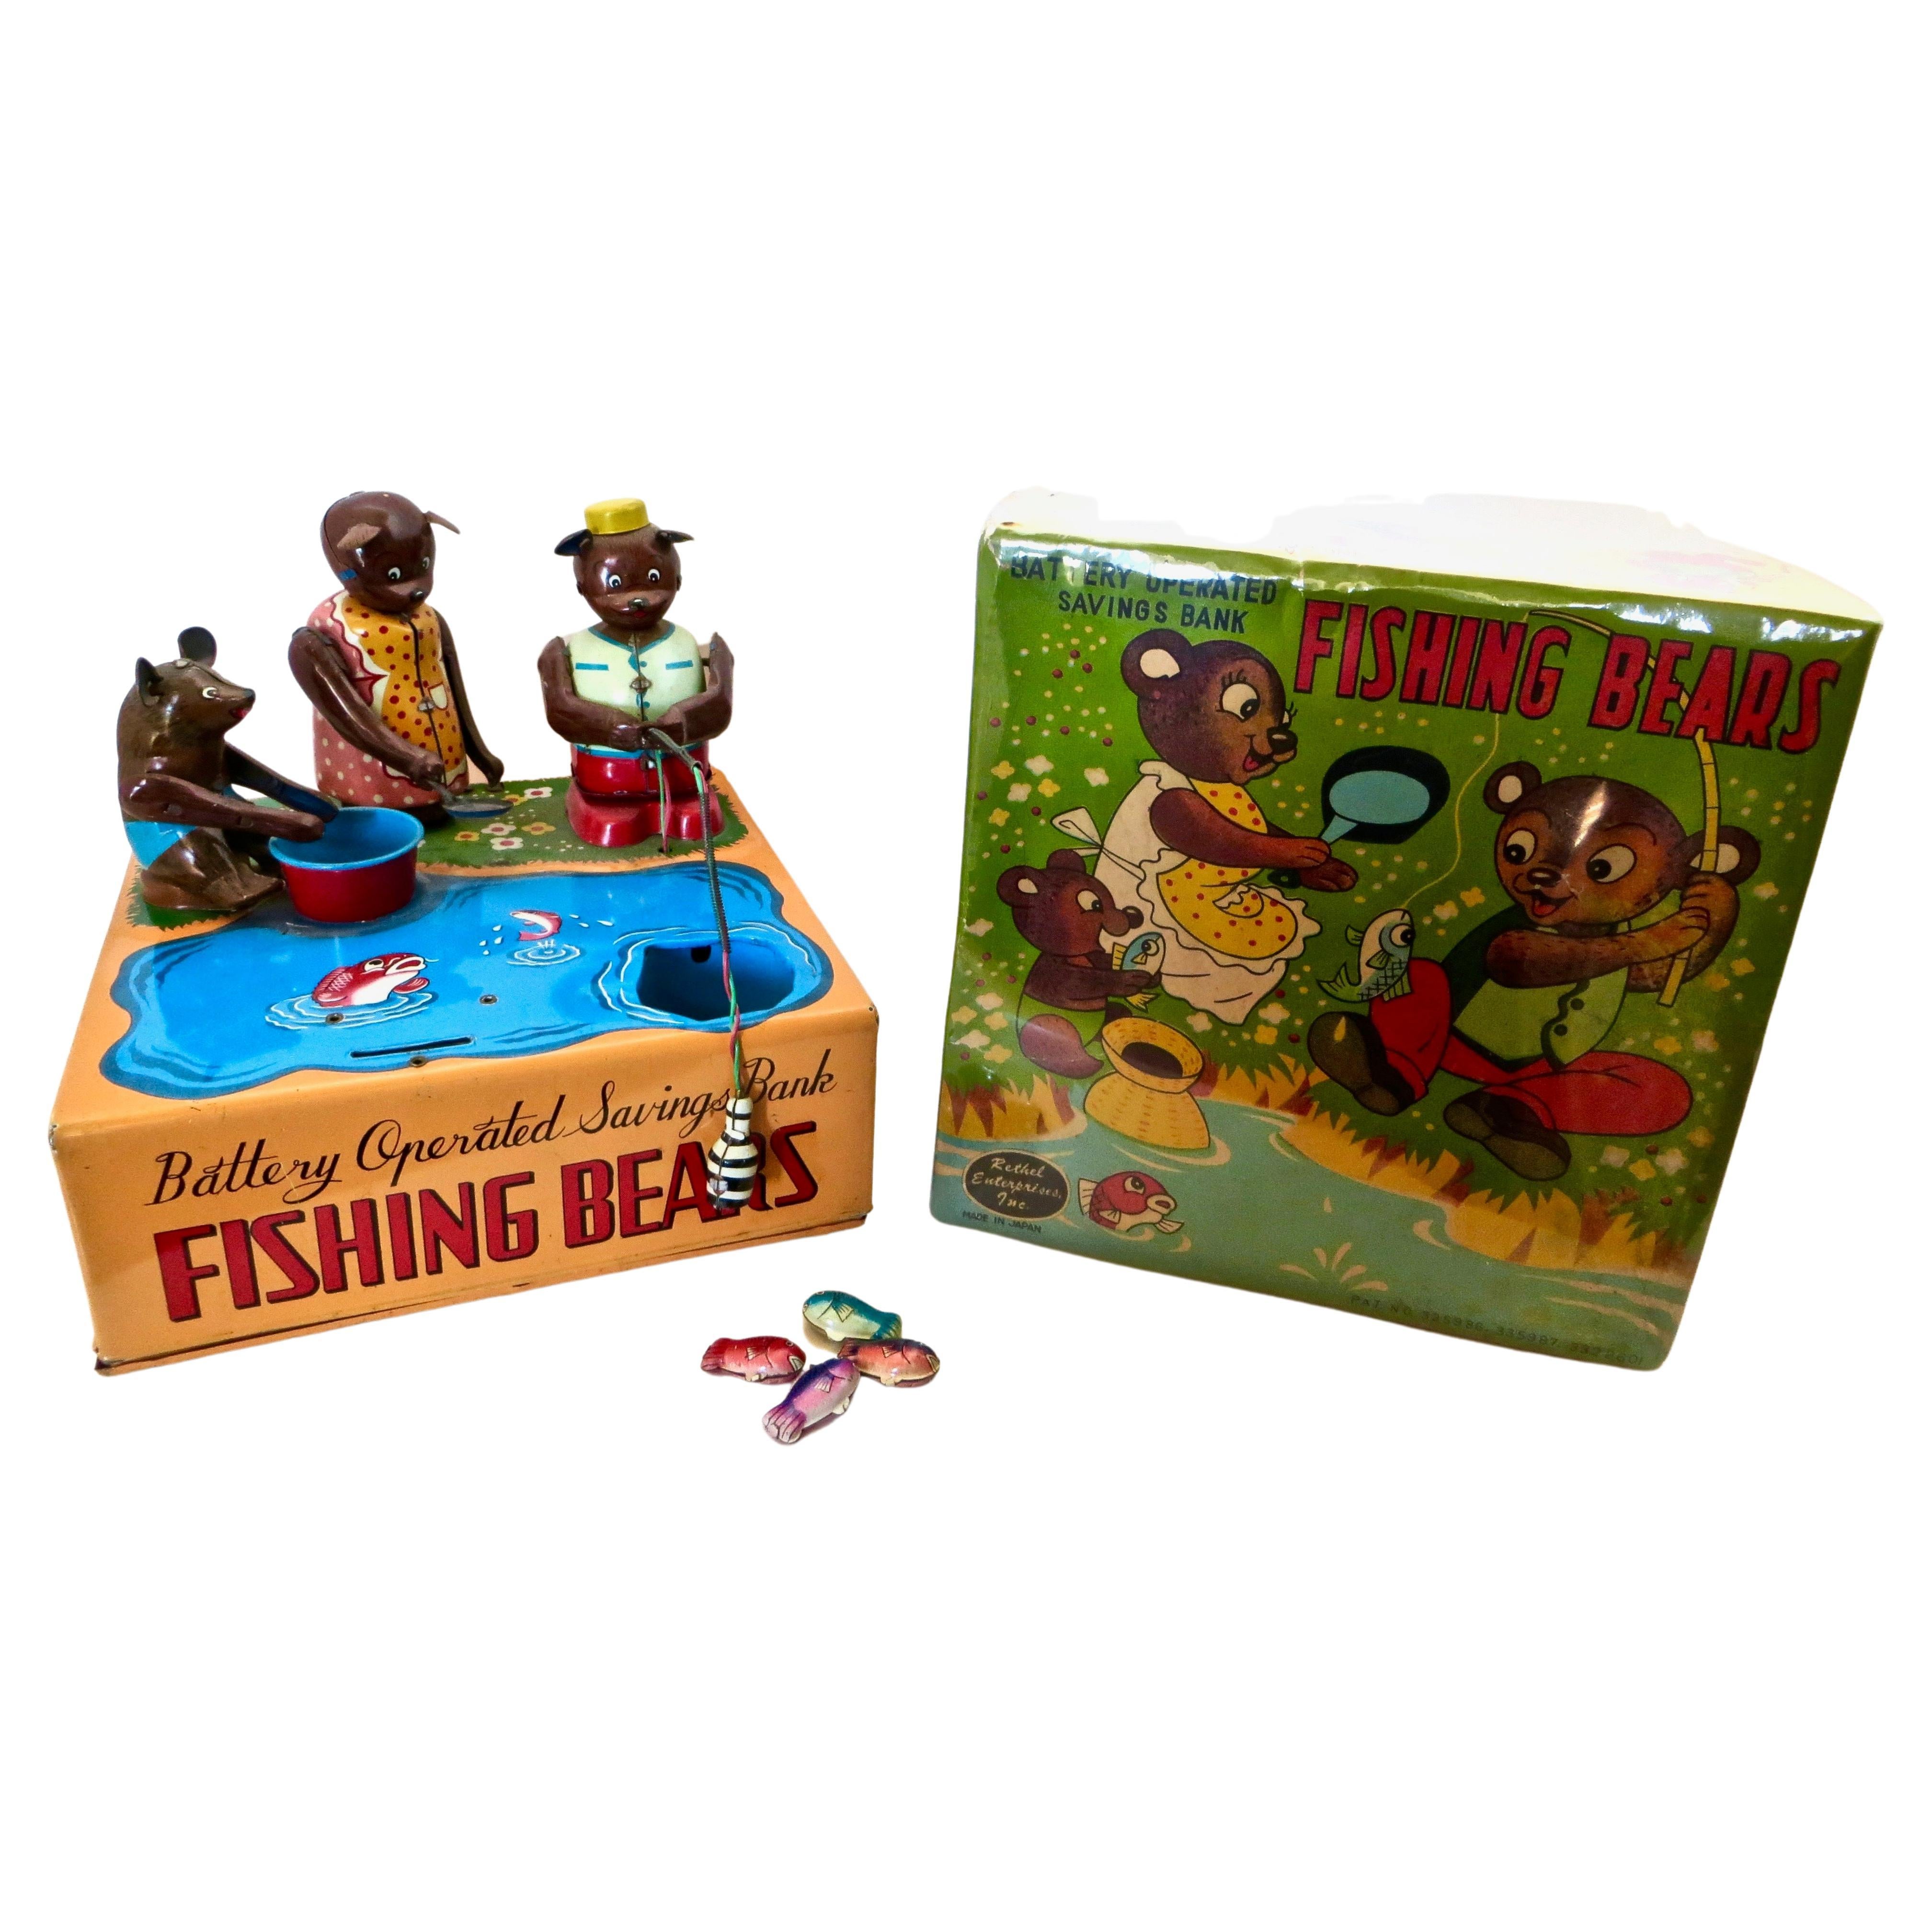 Mechanical Bank "Fishing Bears" Battery Operated with Original Box, circa 1950s For Sale